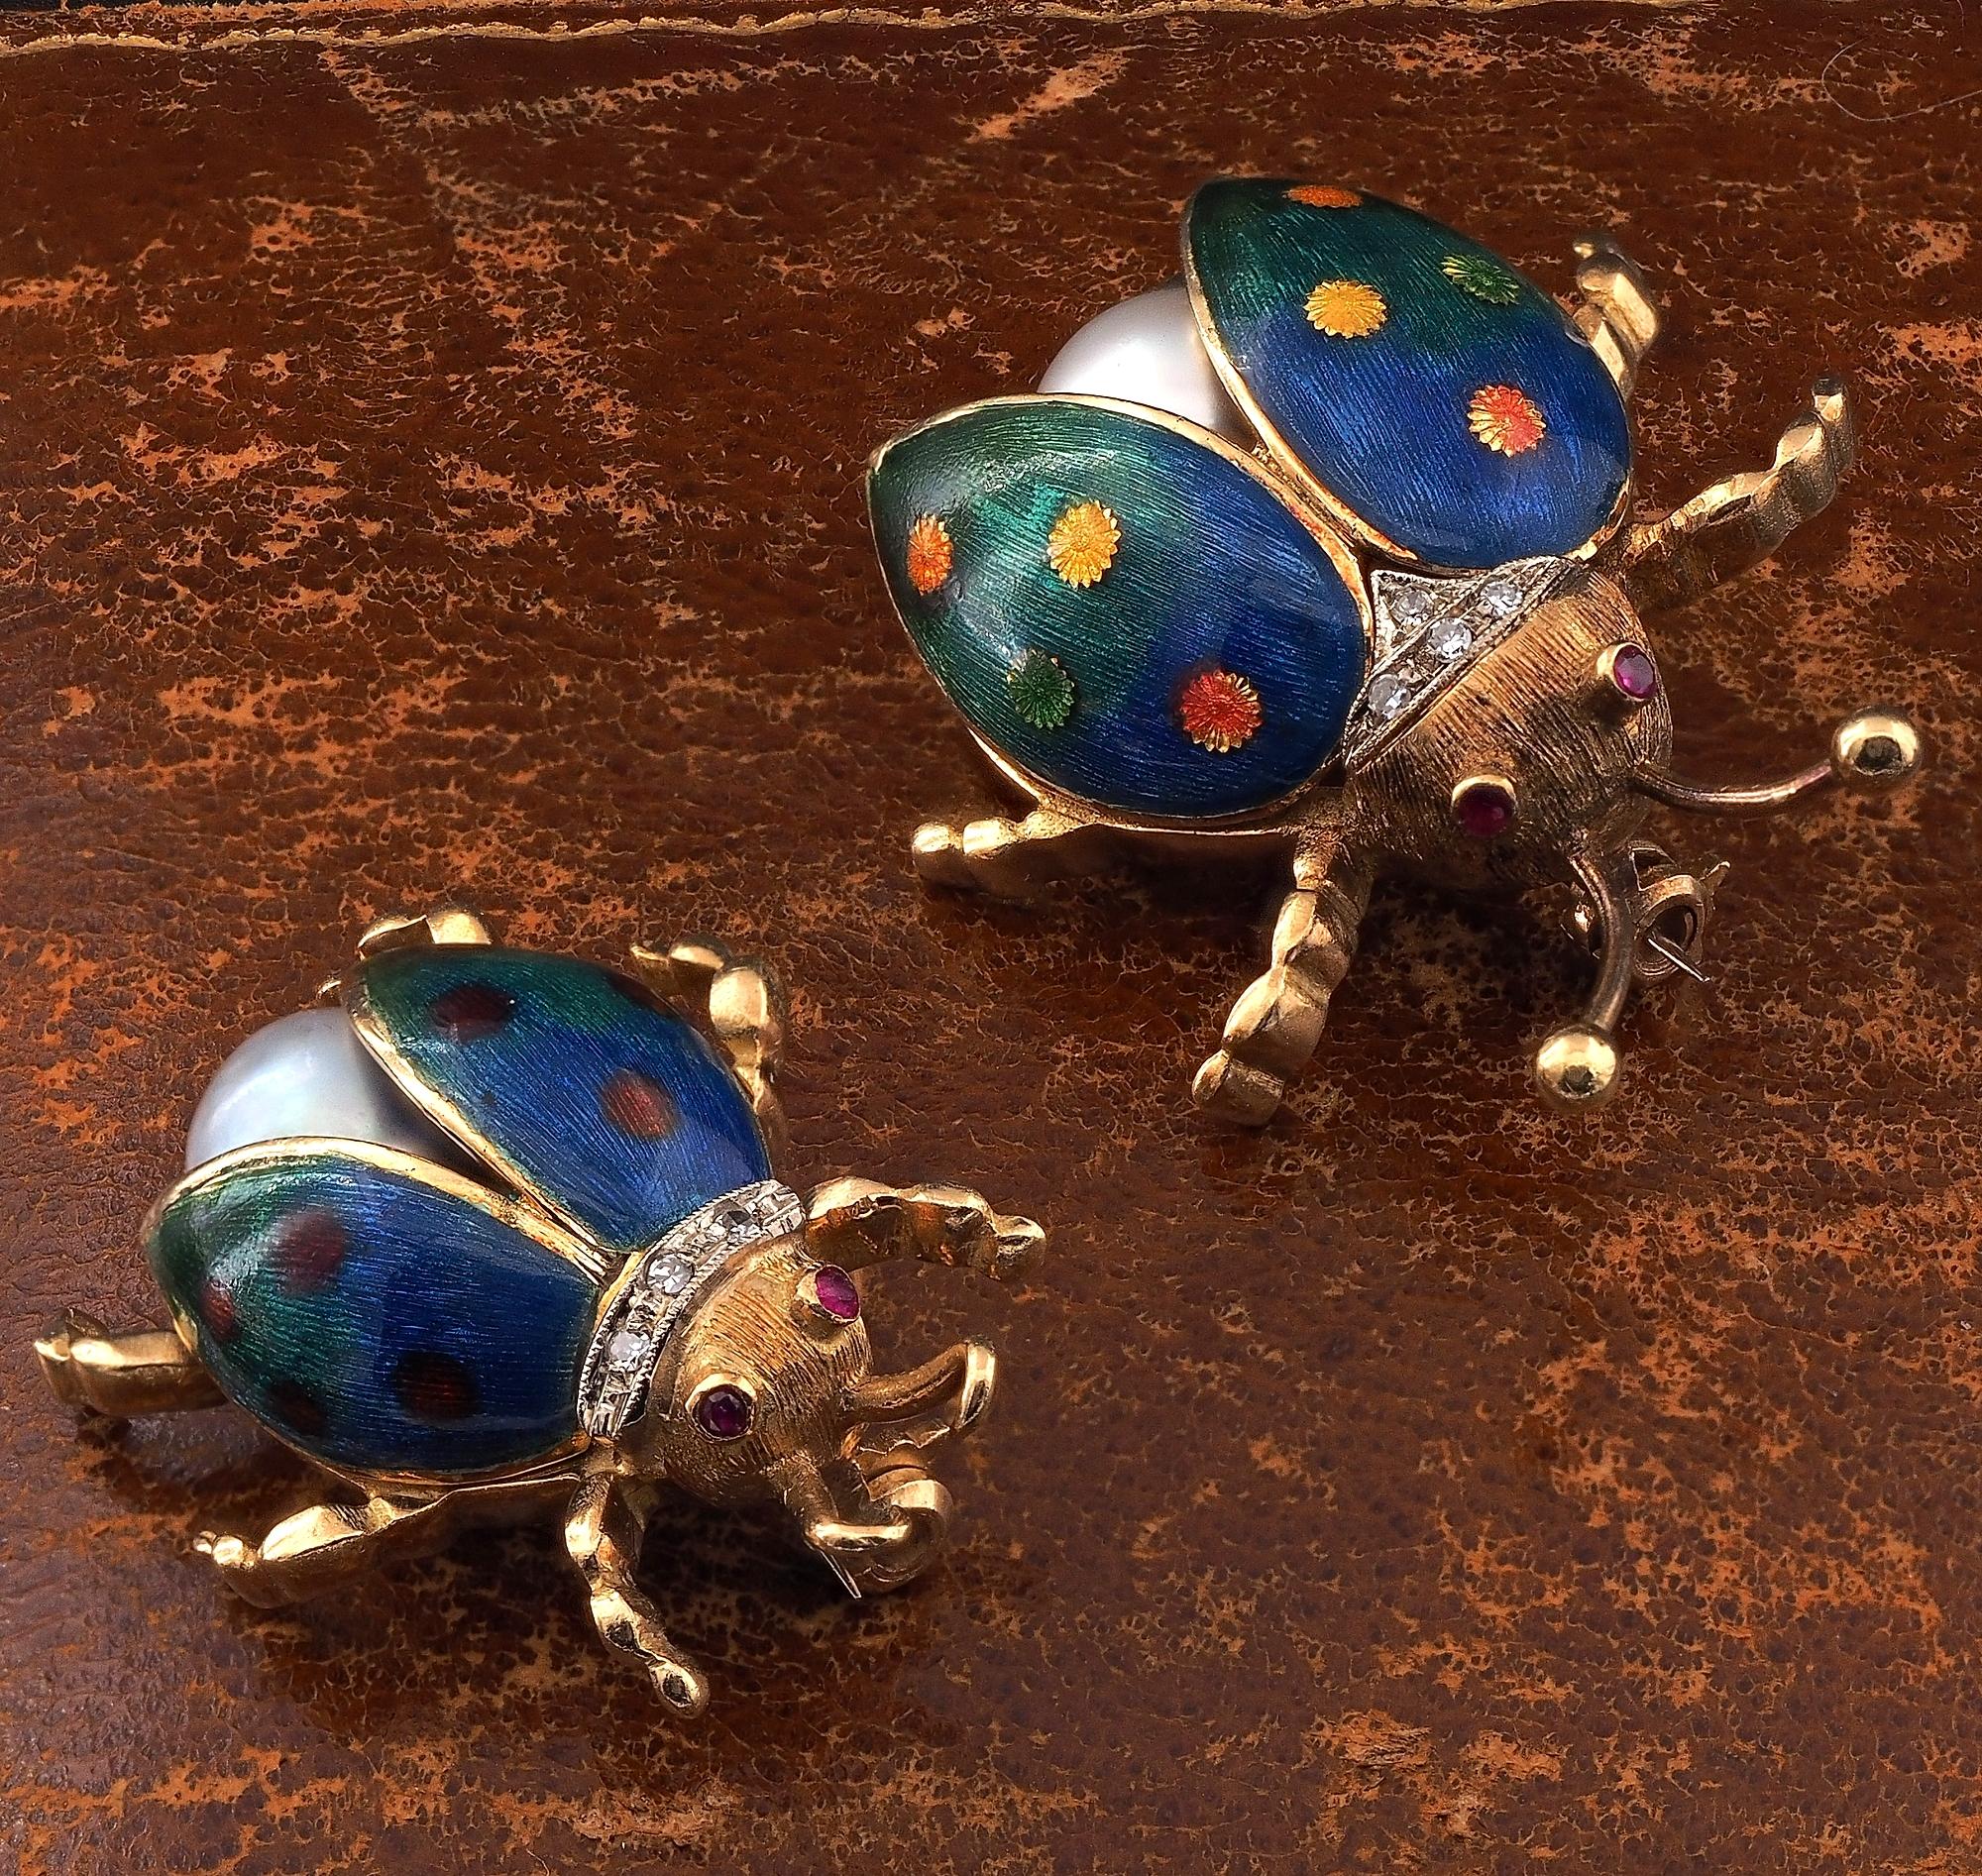 Sweet Lady bug
Emblem of luck, fancy little flying creatures, inspired jewellery masters from Cartier to all majors jewellery makers, a signature lucky insect of timeless beauty
These sweet vintage brooches come in couple with one bigger than the